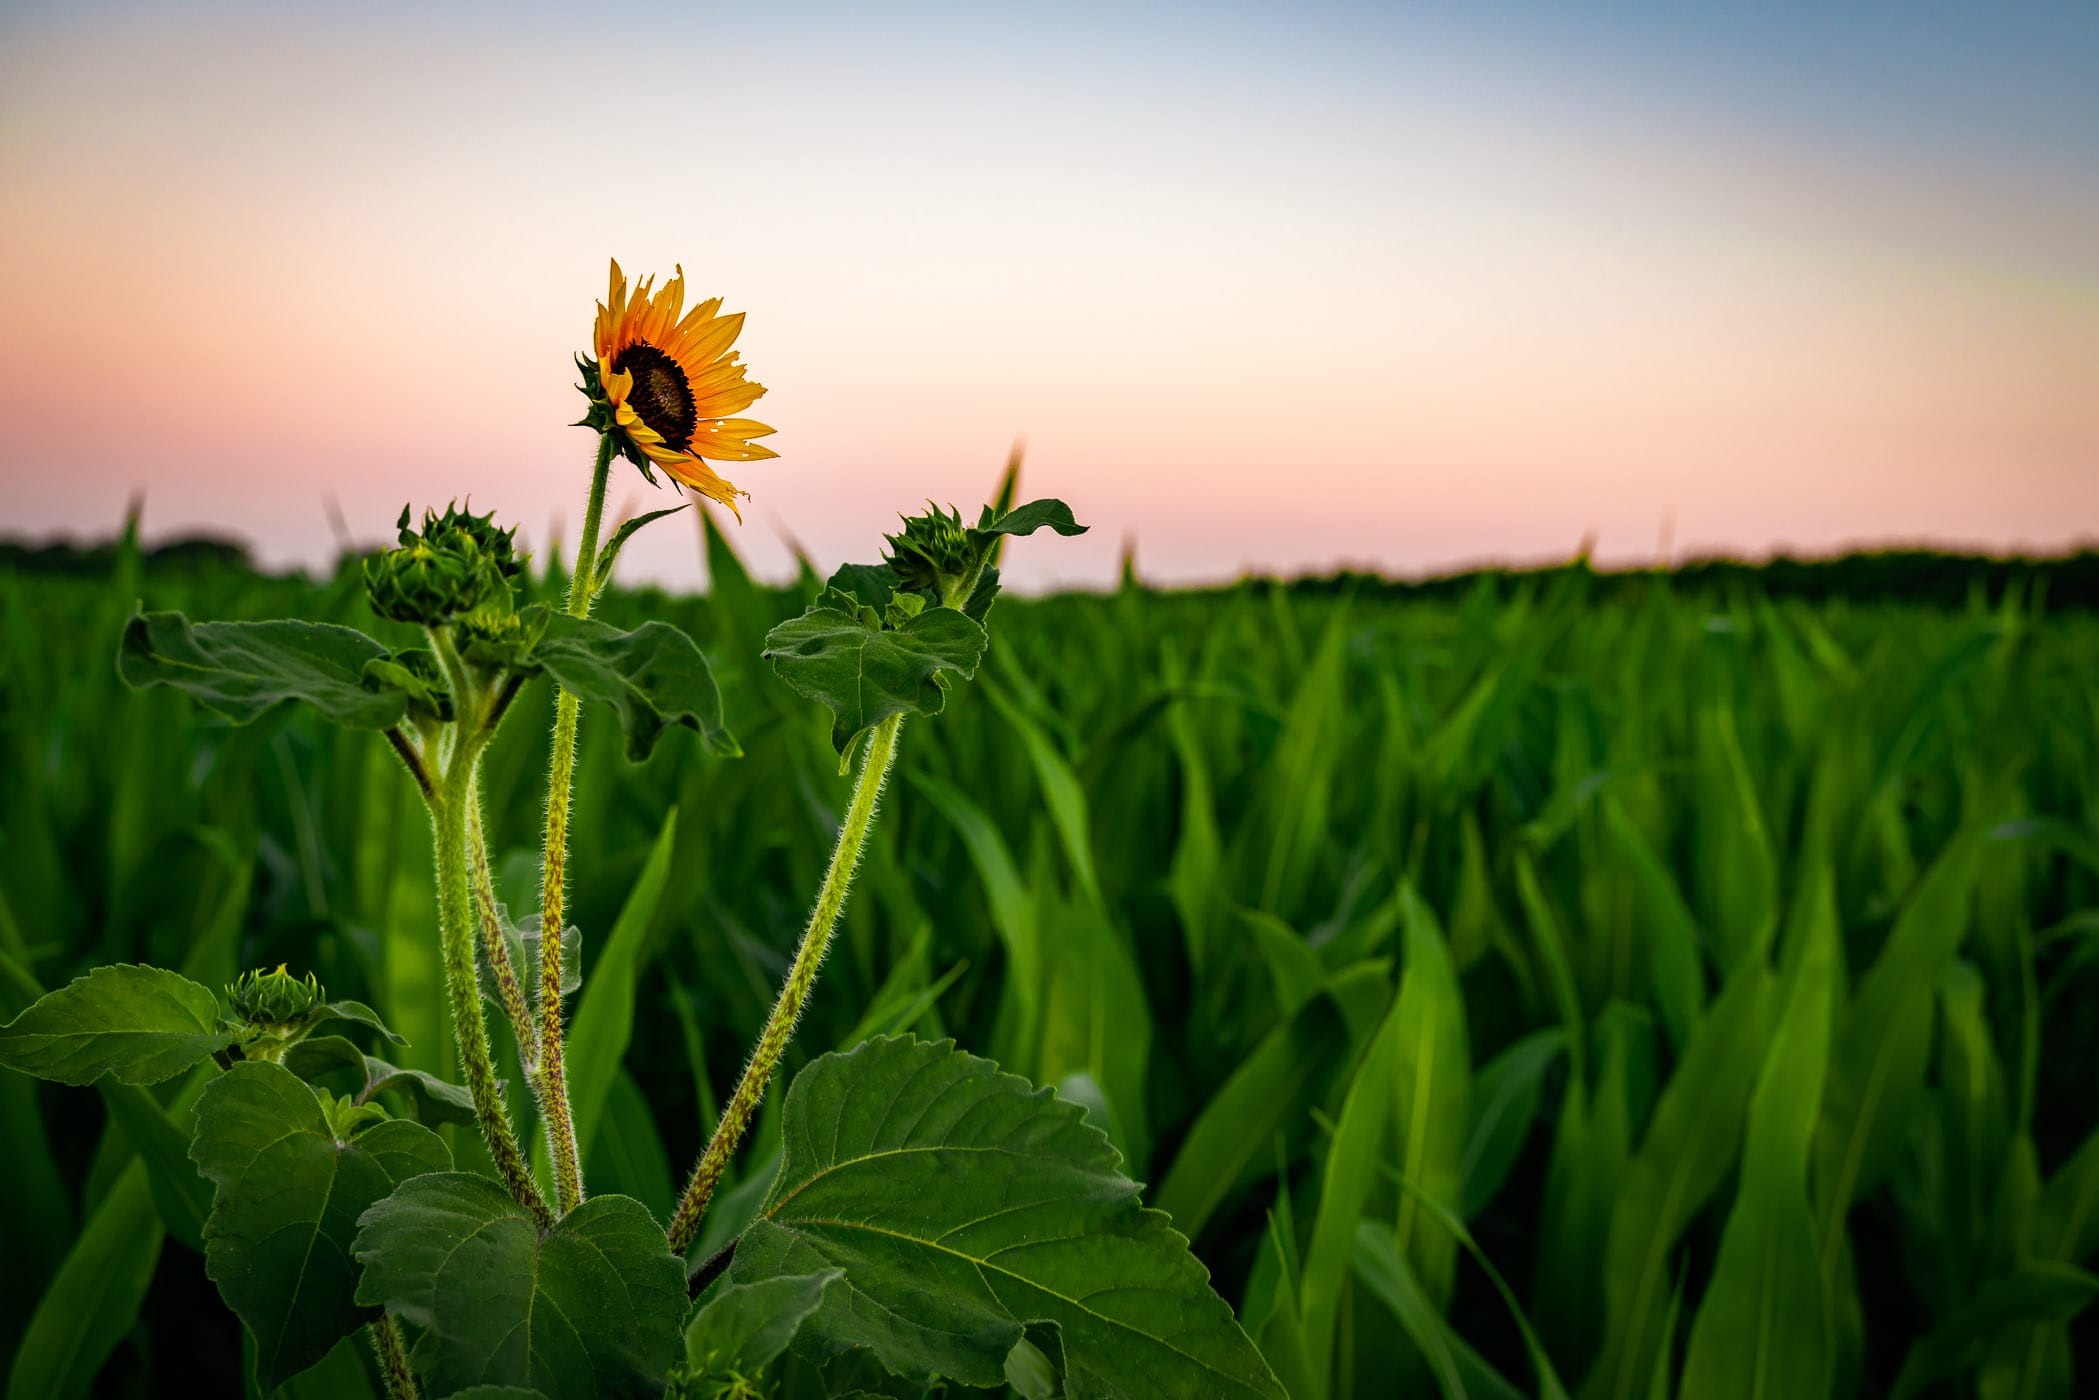 A sunflower reaches into the morning sky in a field near McKinney, Texas.